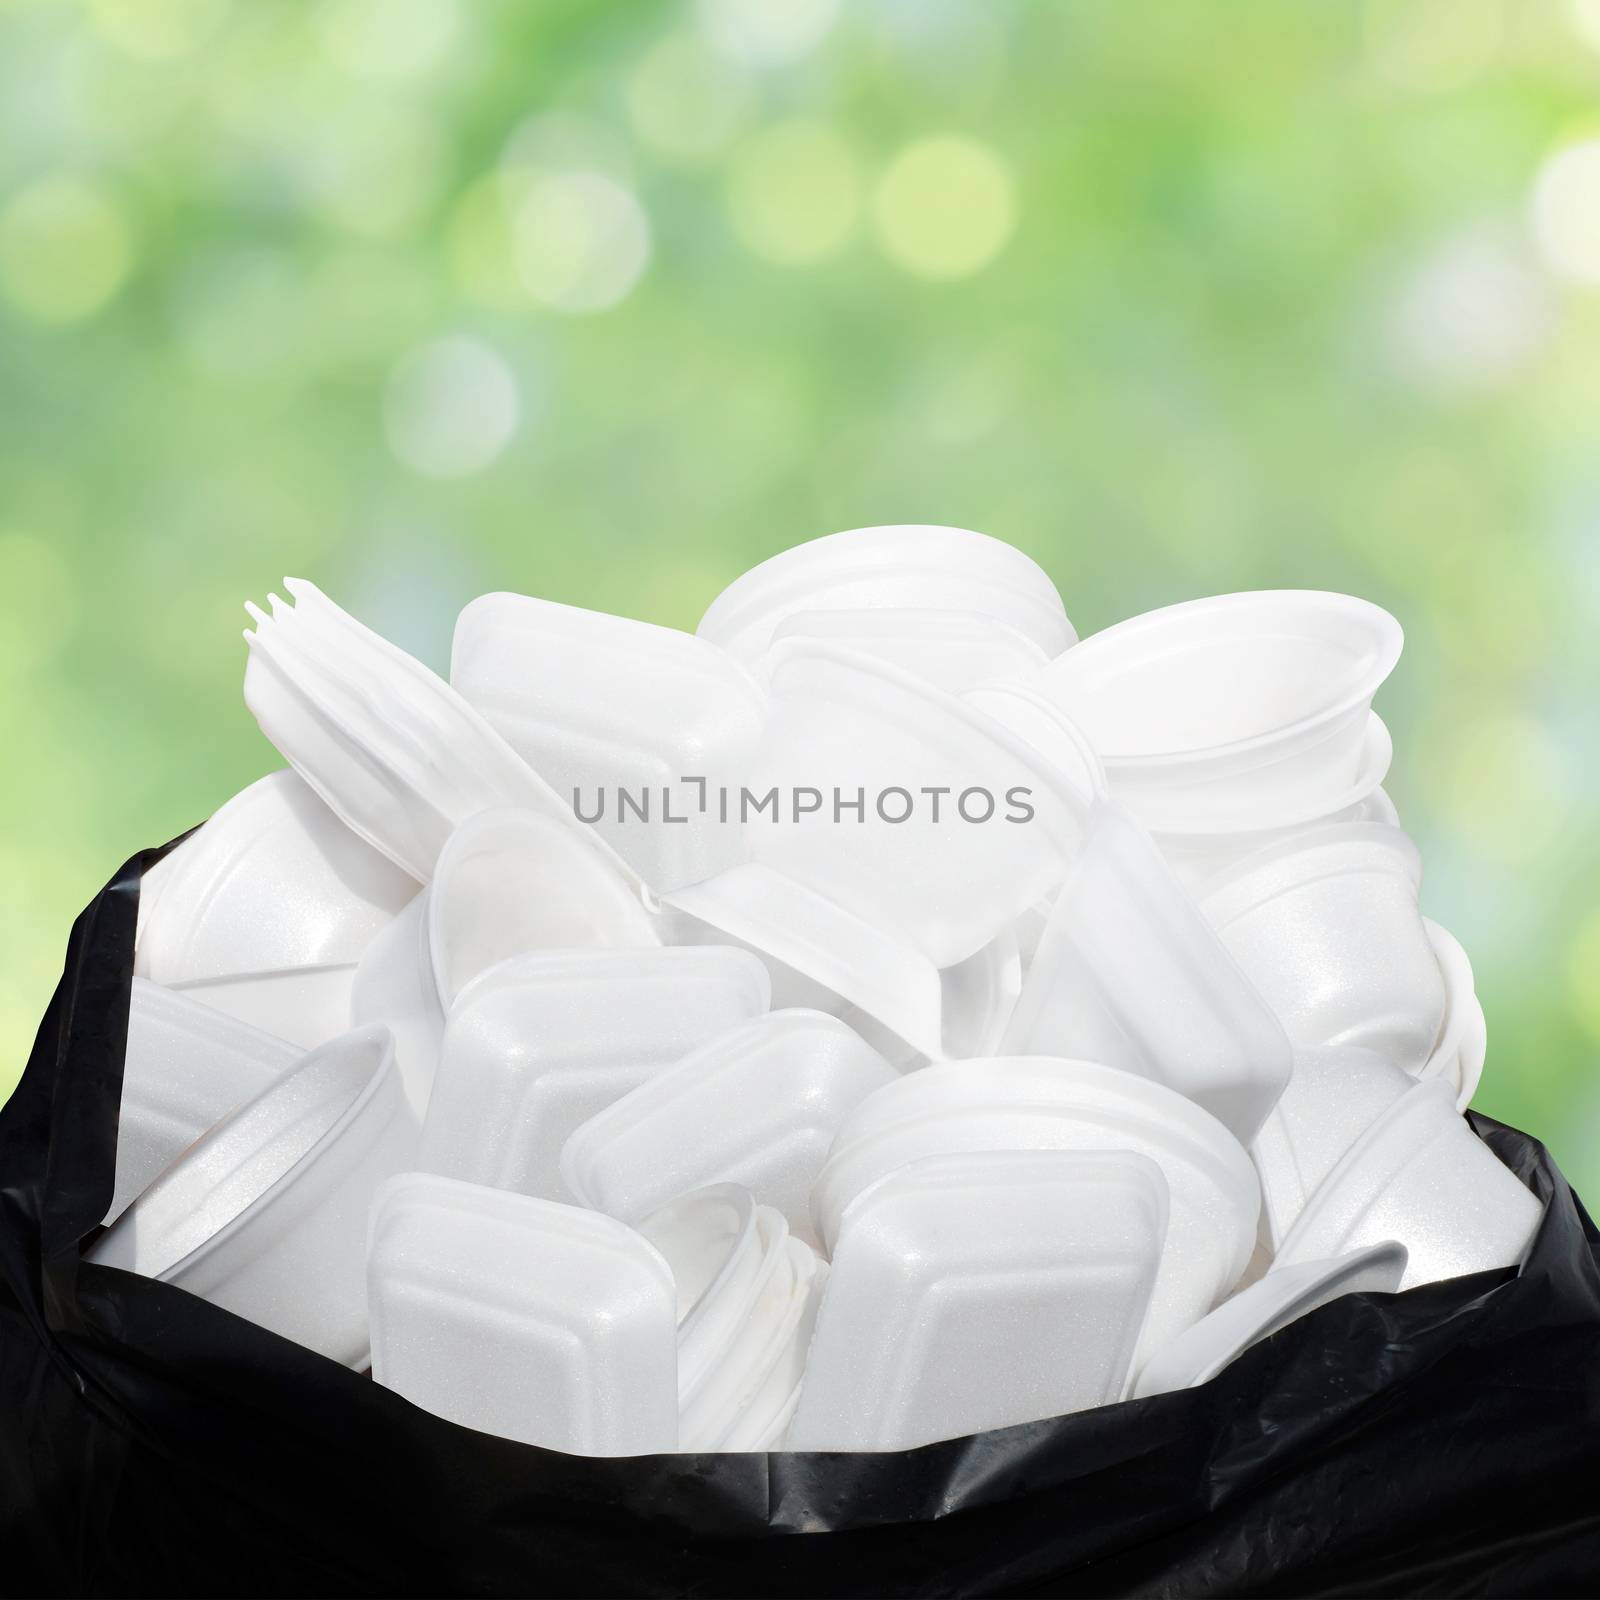 Waste Garbage foam food tray white many pile on the plastic black bag dirty on green nature bokeh background by cgdeaw